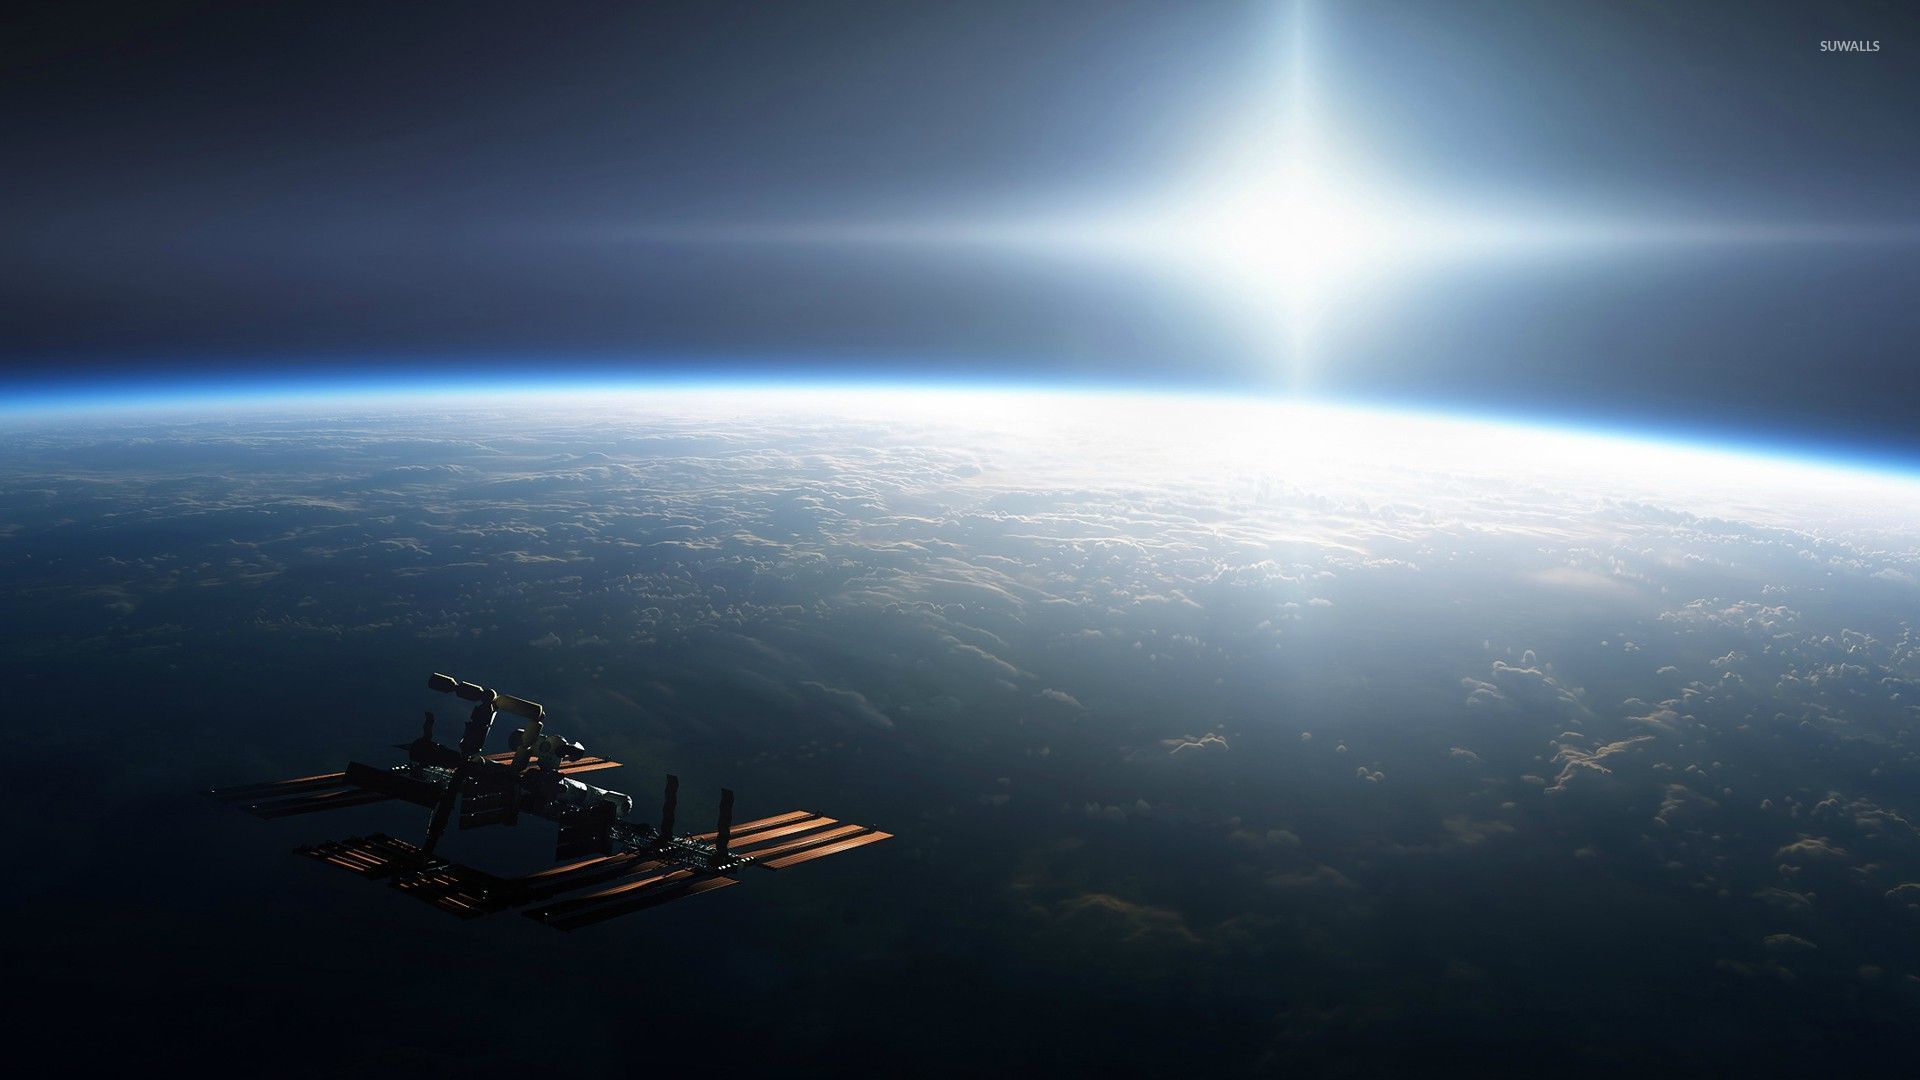 International Space Station orbiting Earth wallpaper - Space wallpapers